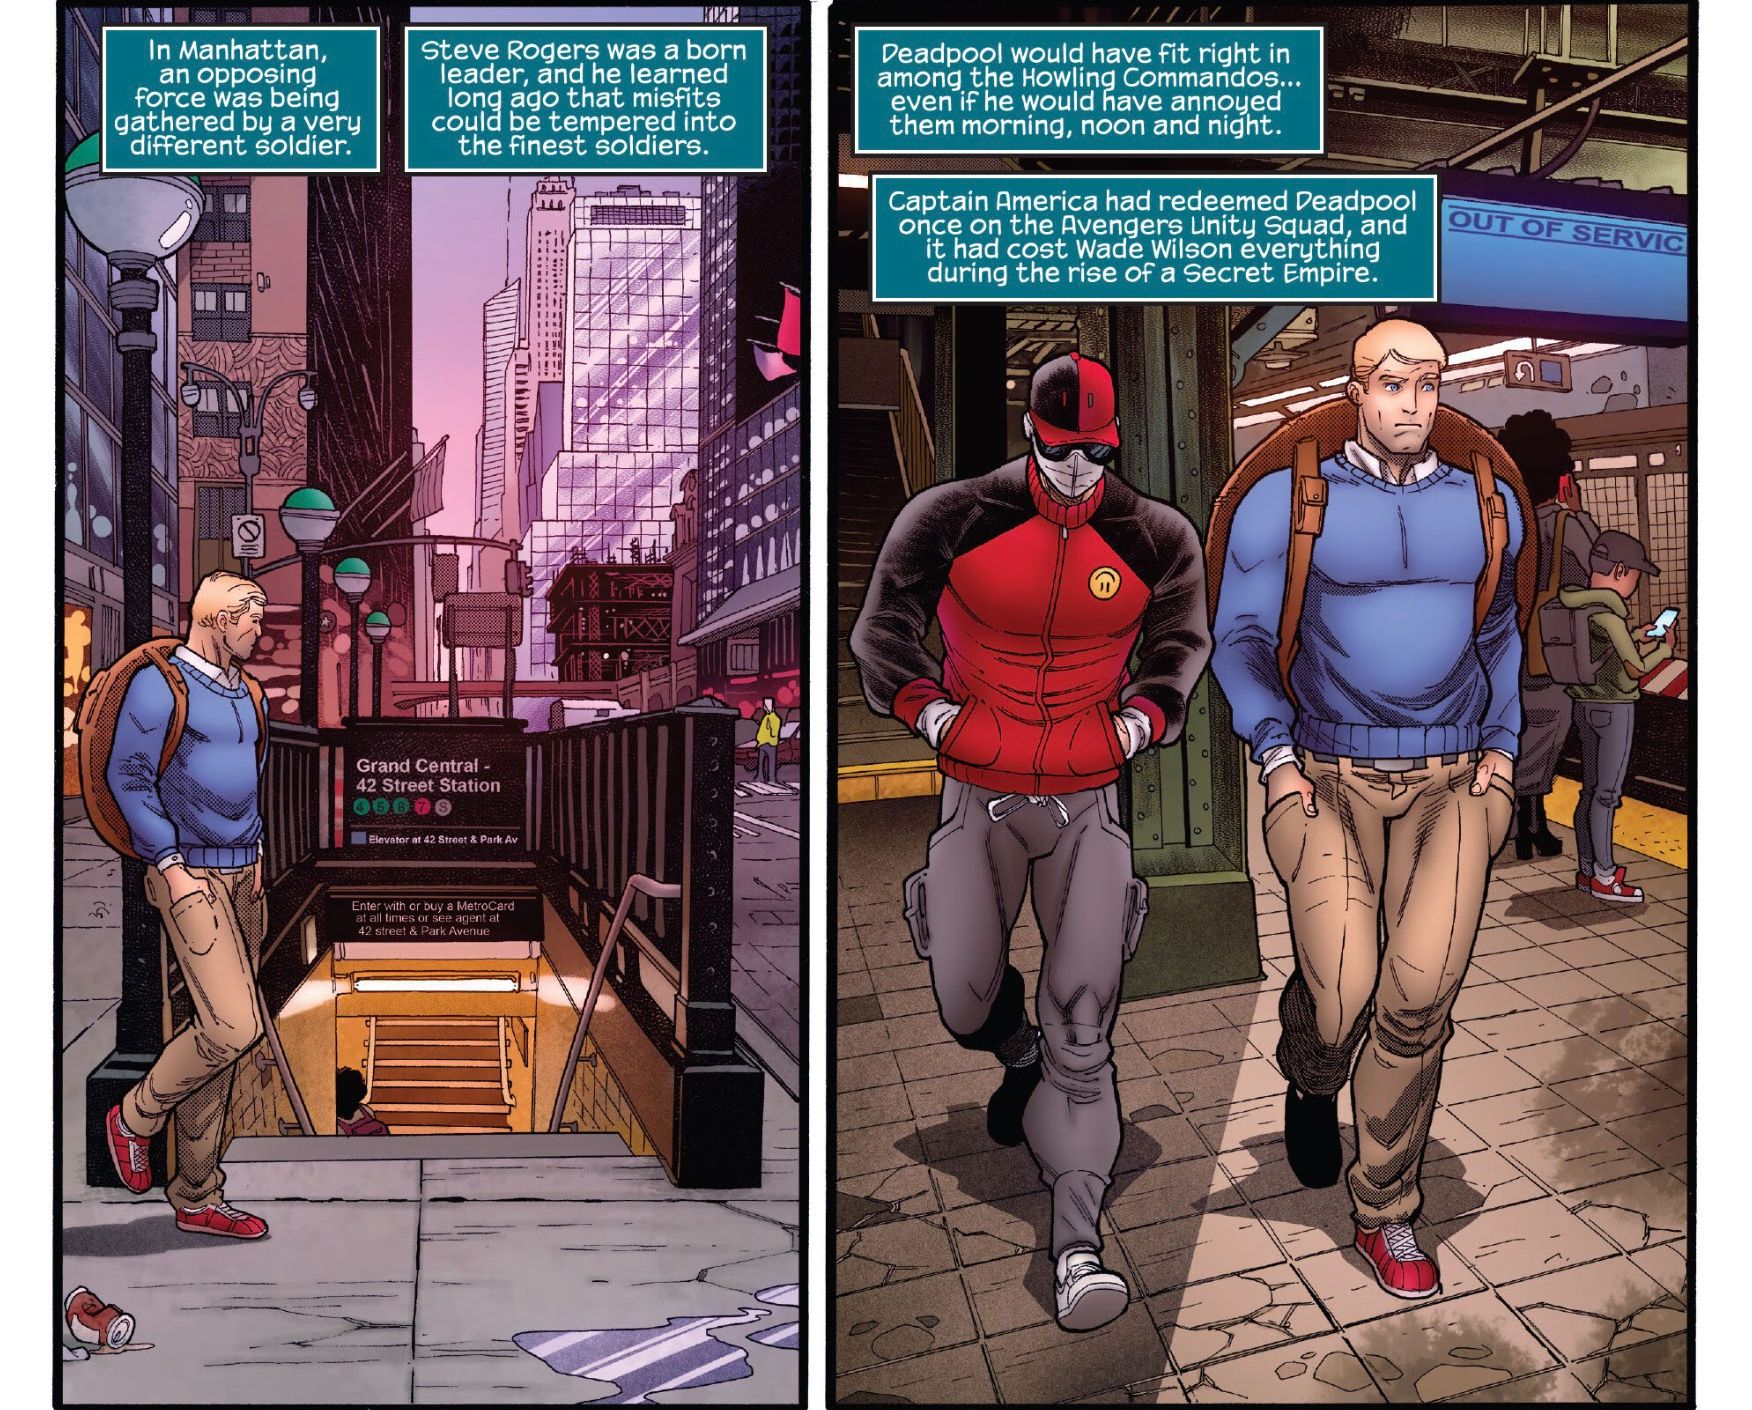 Cap and Deadpool in civilian attire, from Uncanny Avengers #1